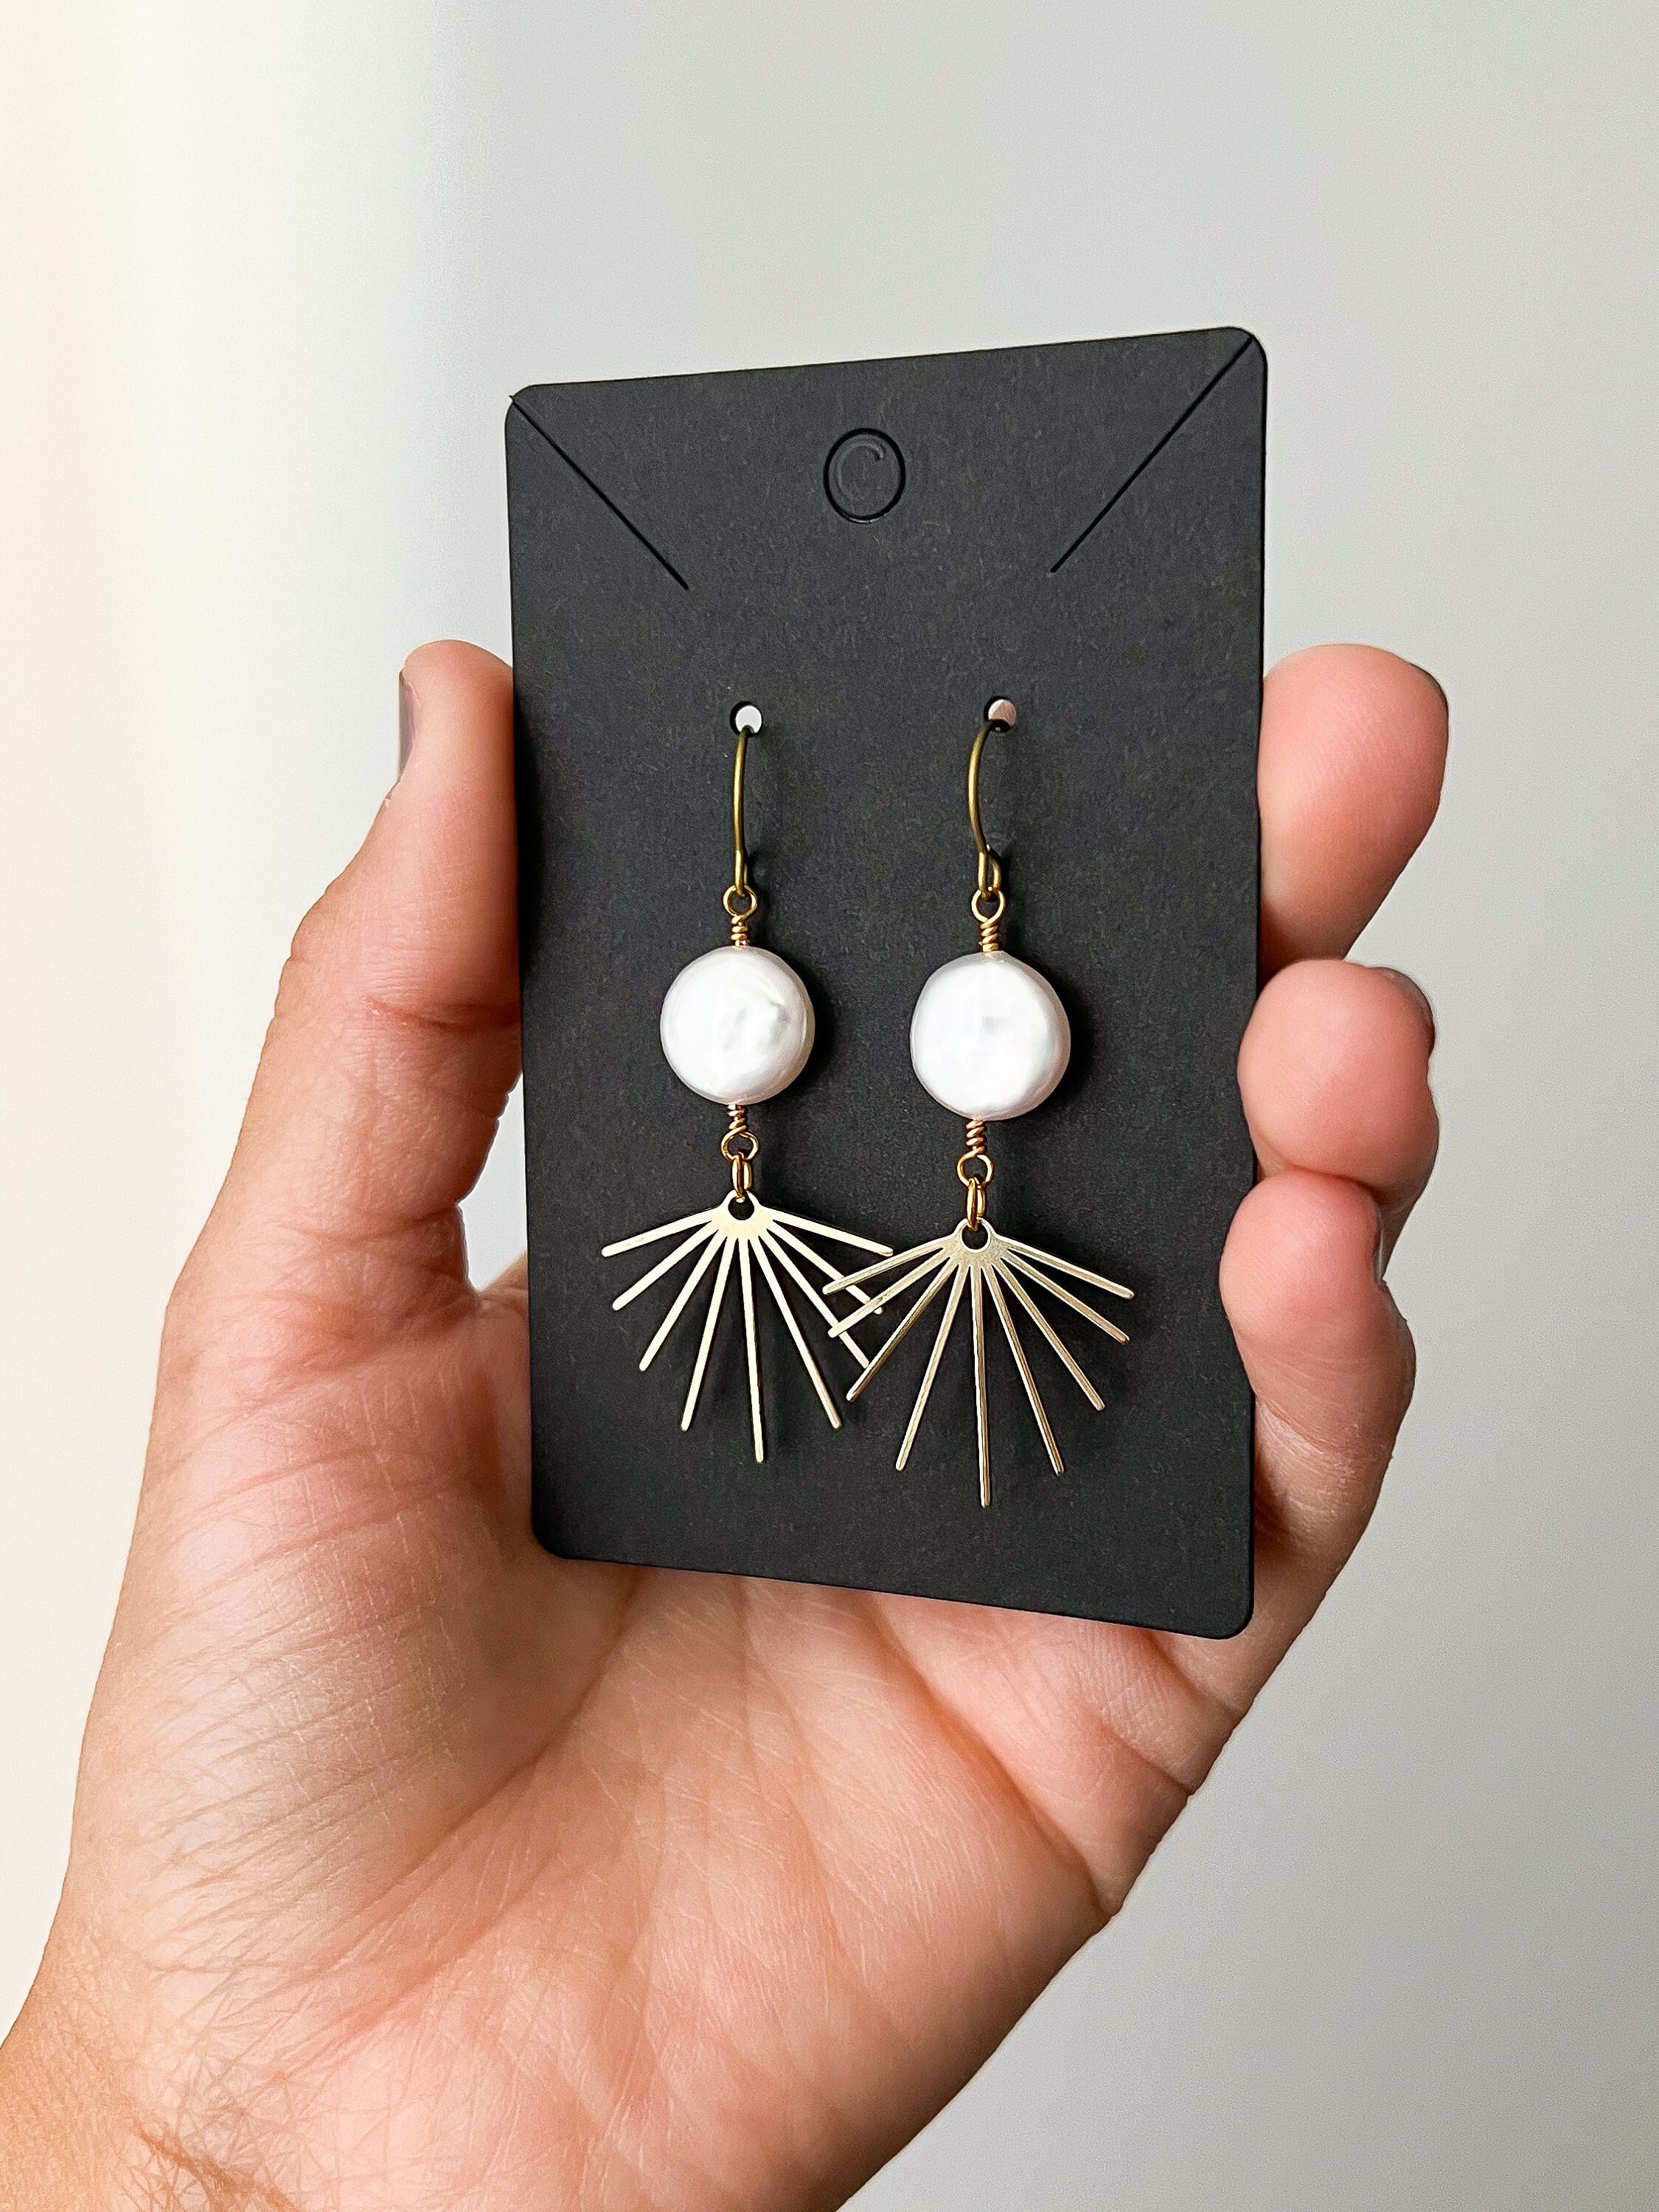 Sunburst & Pearl Earrings in Gold Filled or Titanium Ear Wires